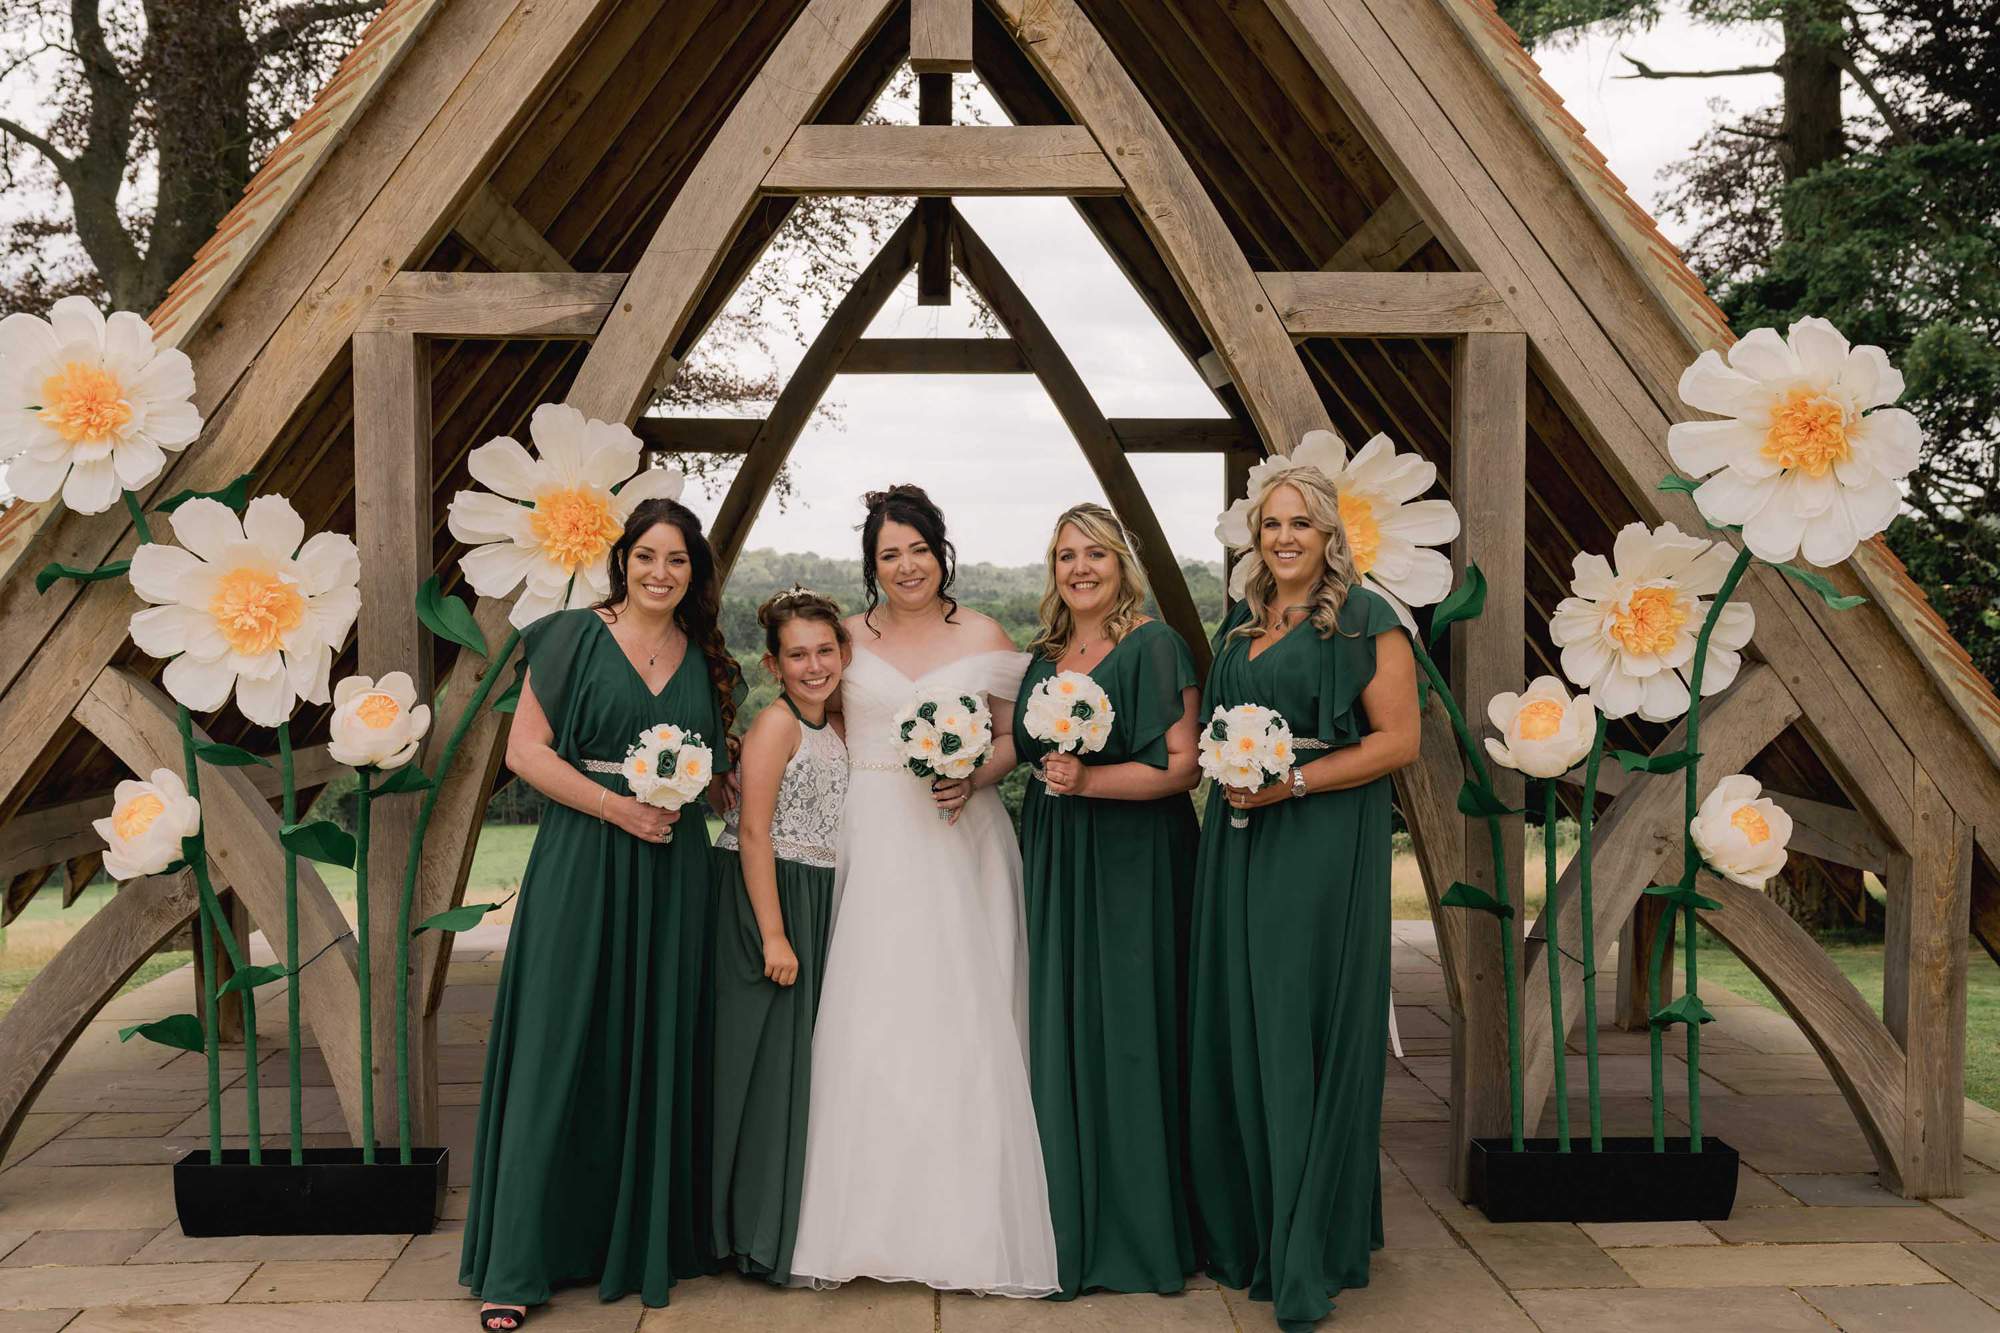 Bride and her bridesmaids and flower girl at Highley Manor wedding venue in Sussex.